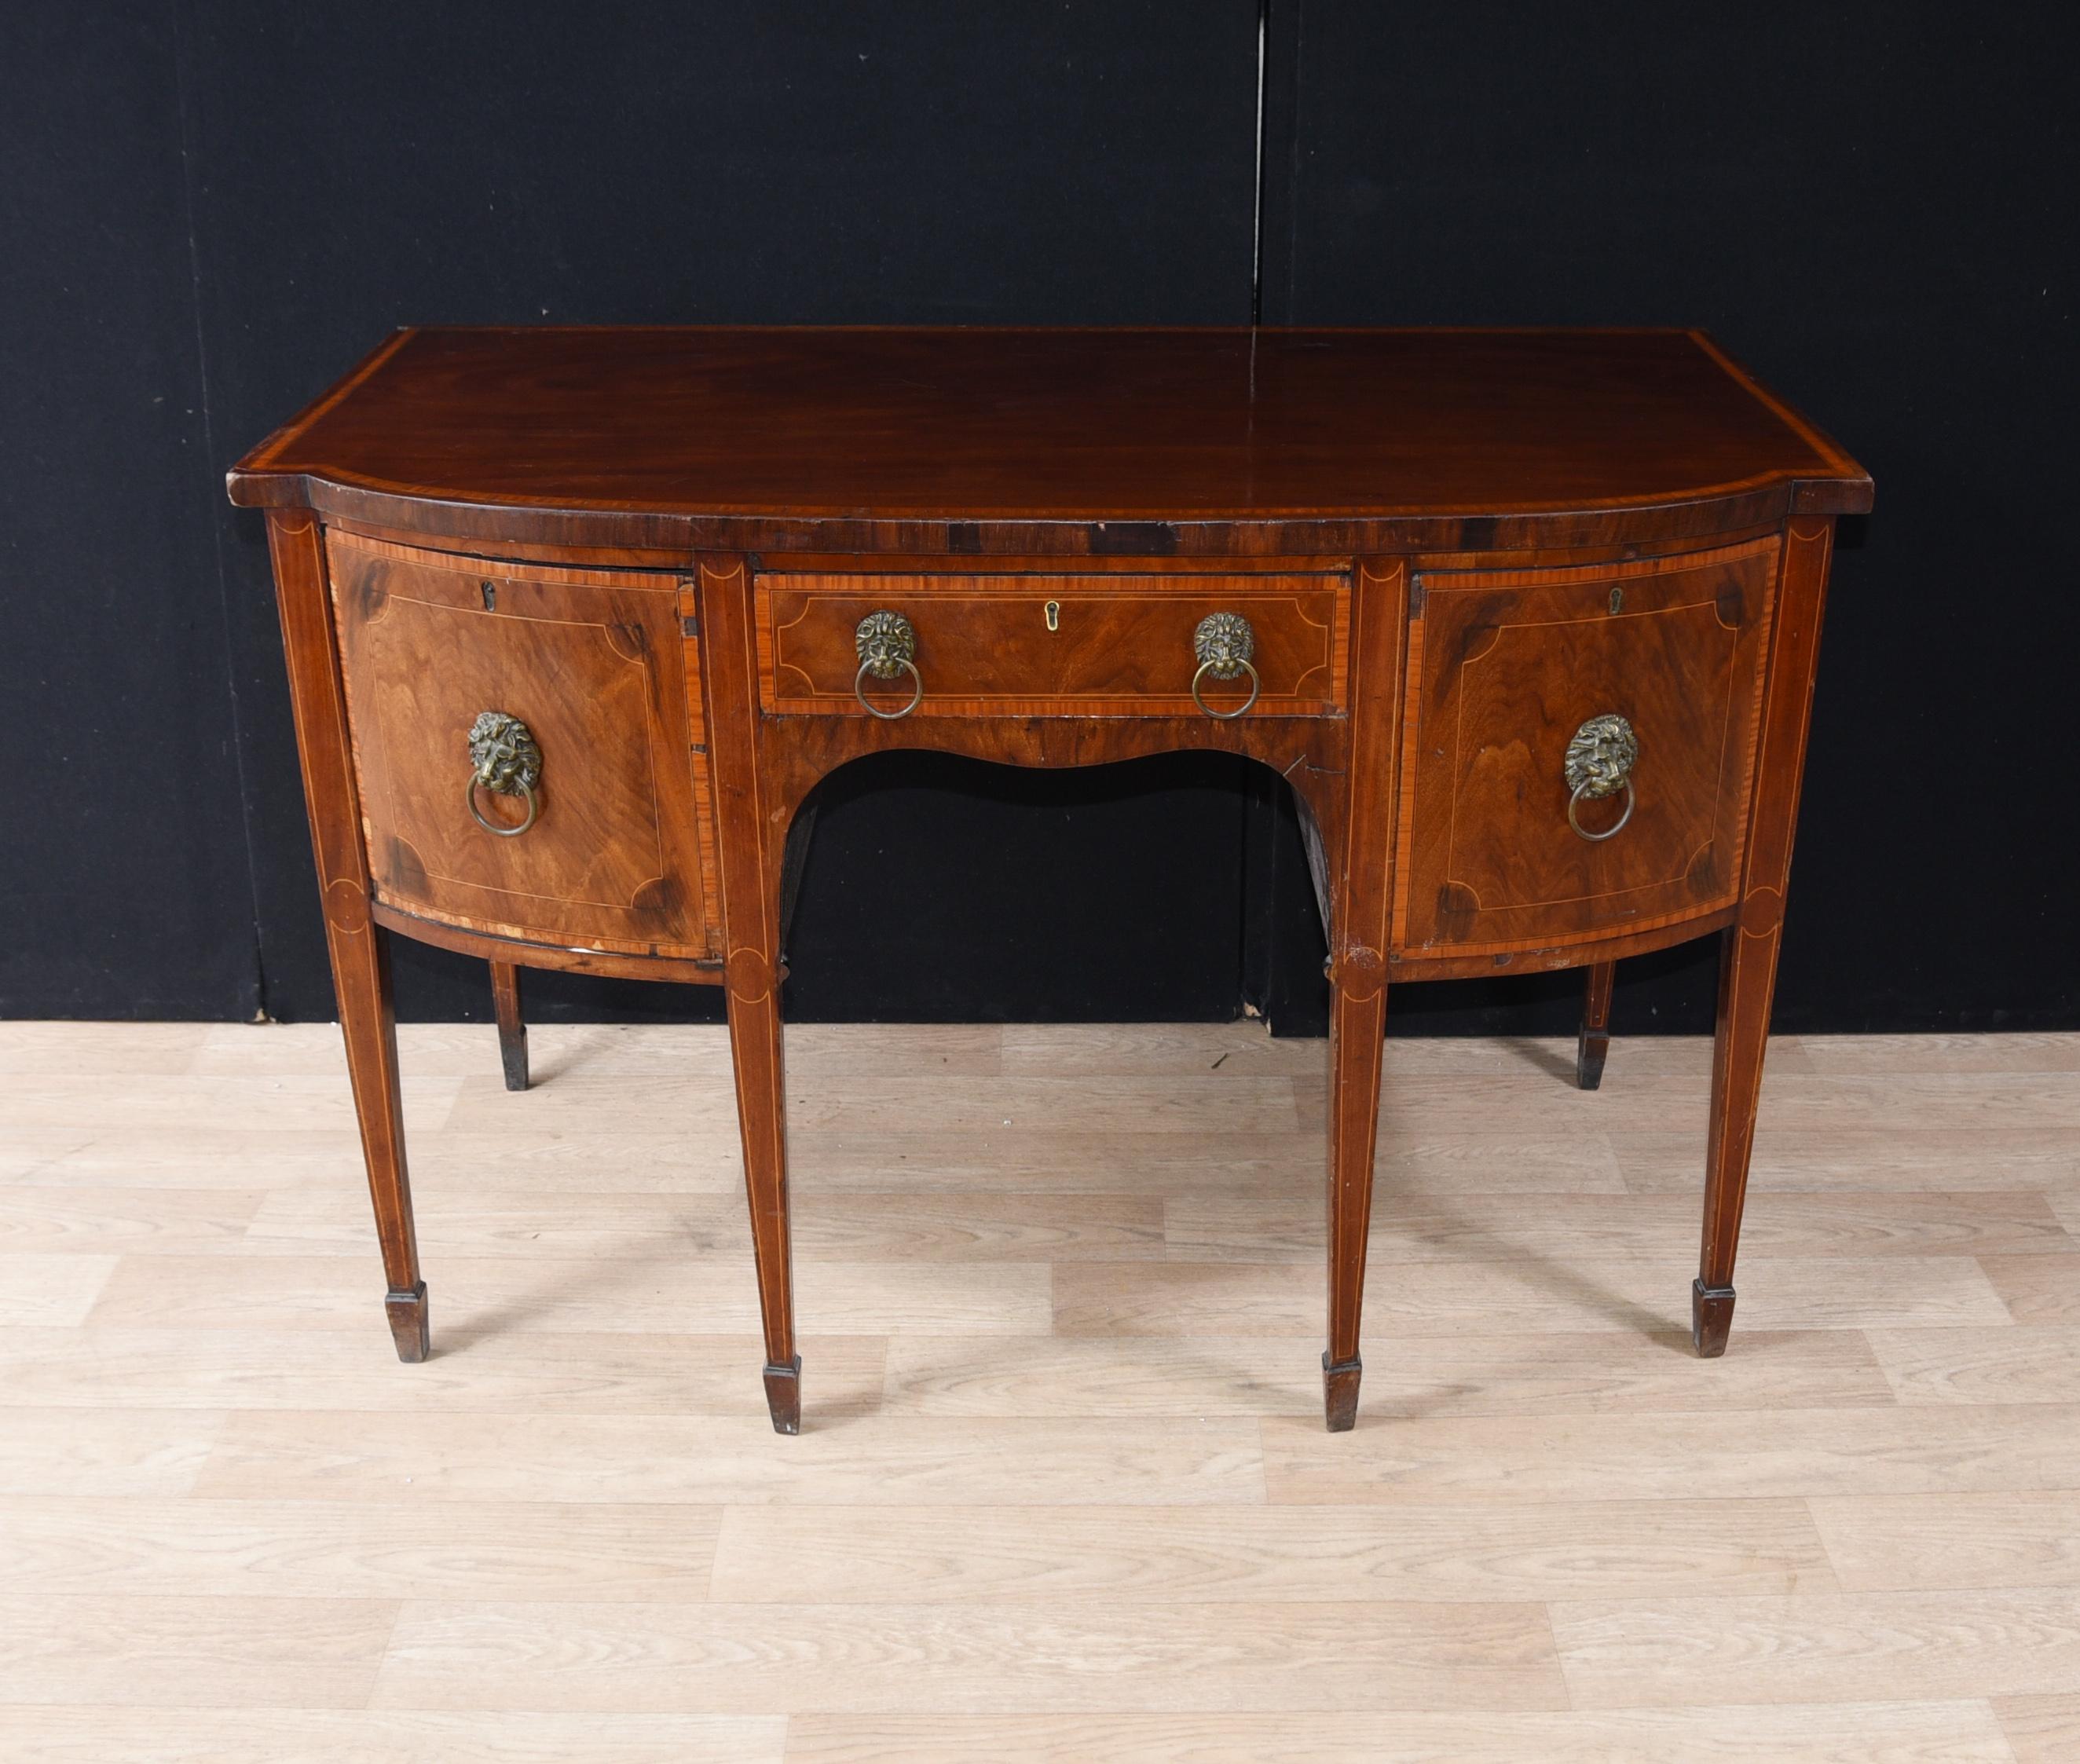 - Gorgeous antique mahogany Georgian sideboard or buffet
- We date this piece to circa 1790
- Original fixtures including distinctive lions head handles
- Viewings available by appointment possible at our Hertfordshire showroom
- Note if you